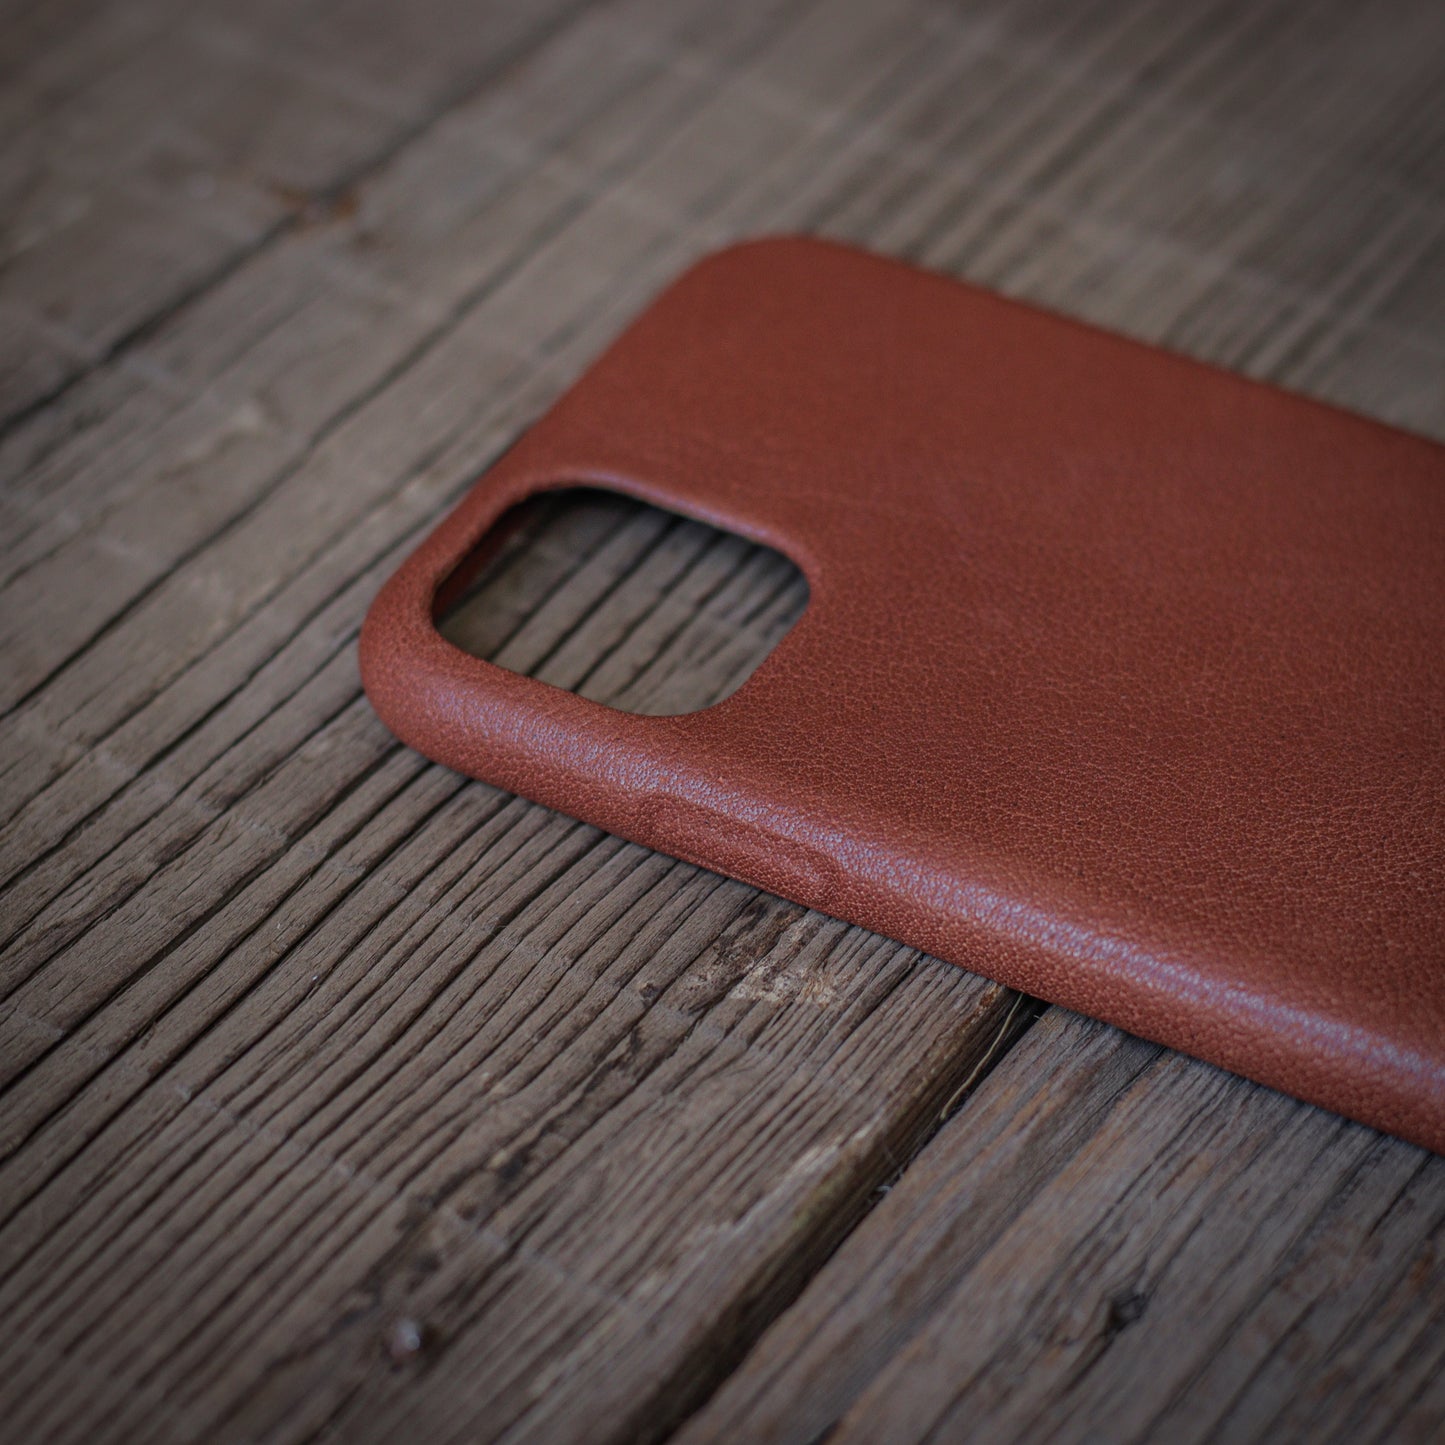 iPhone 11 Leather Case - Brown